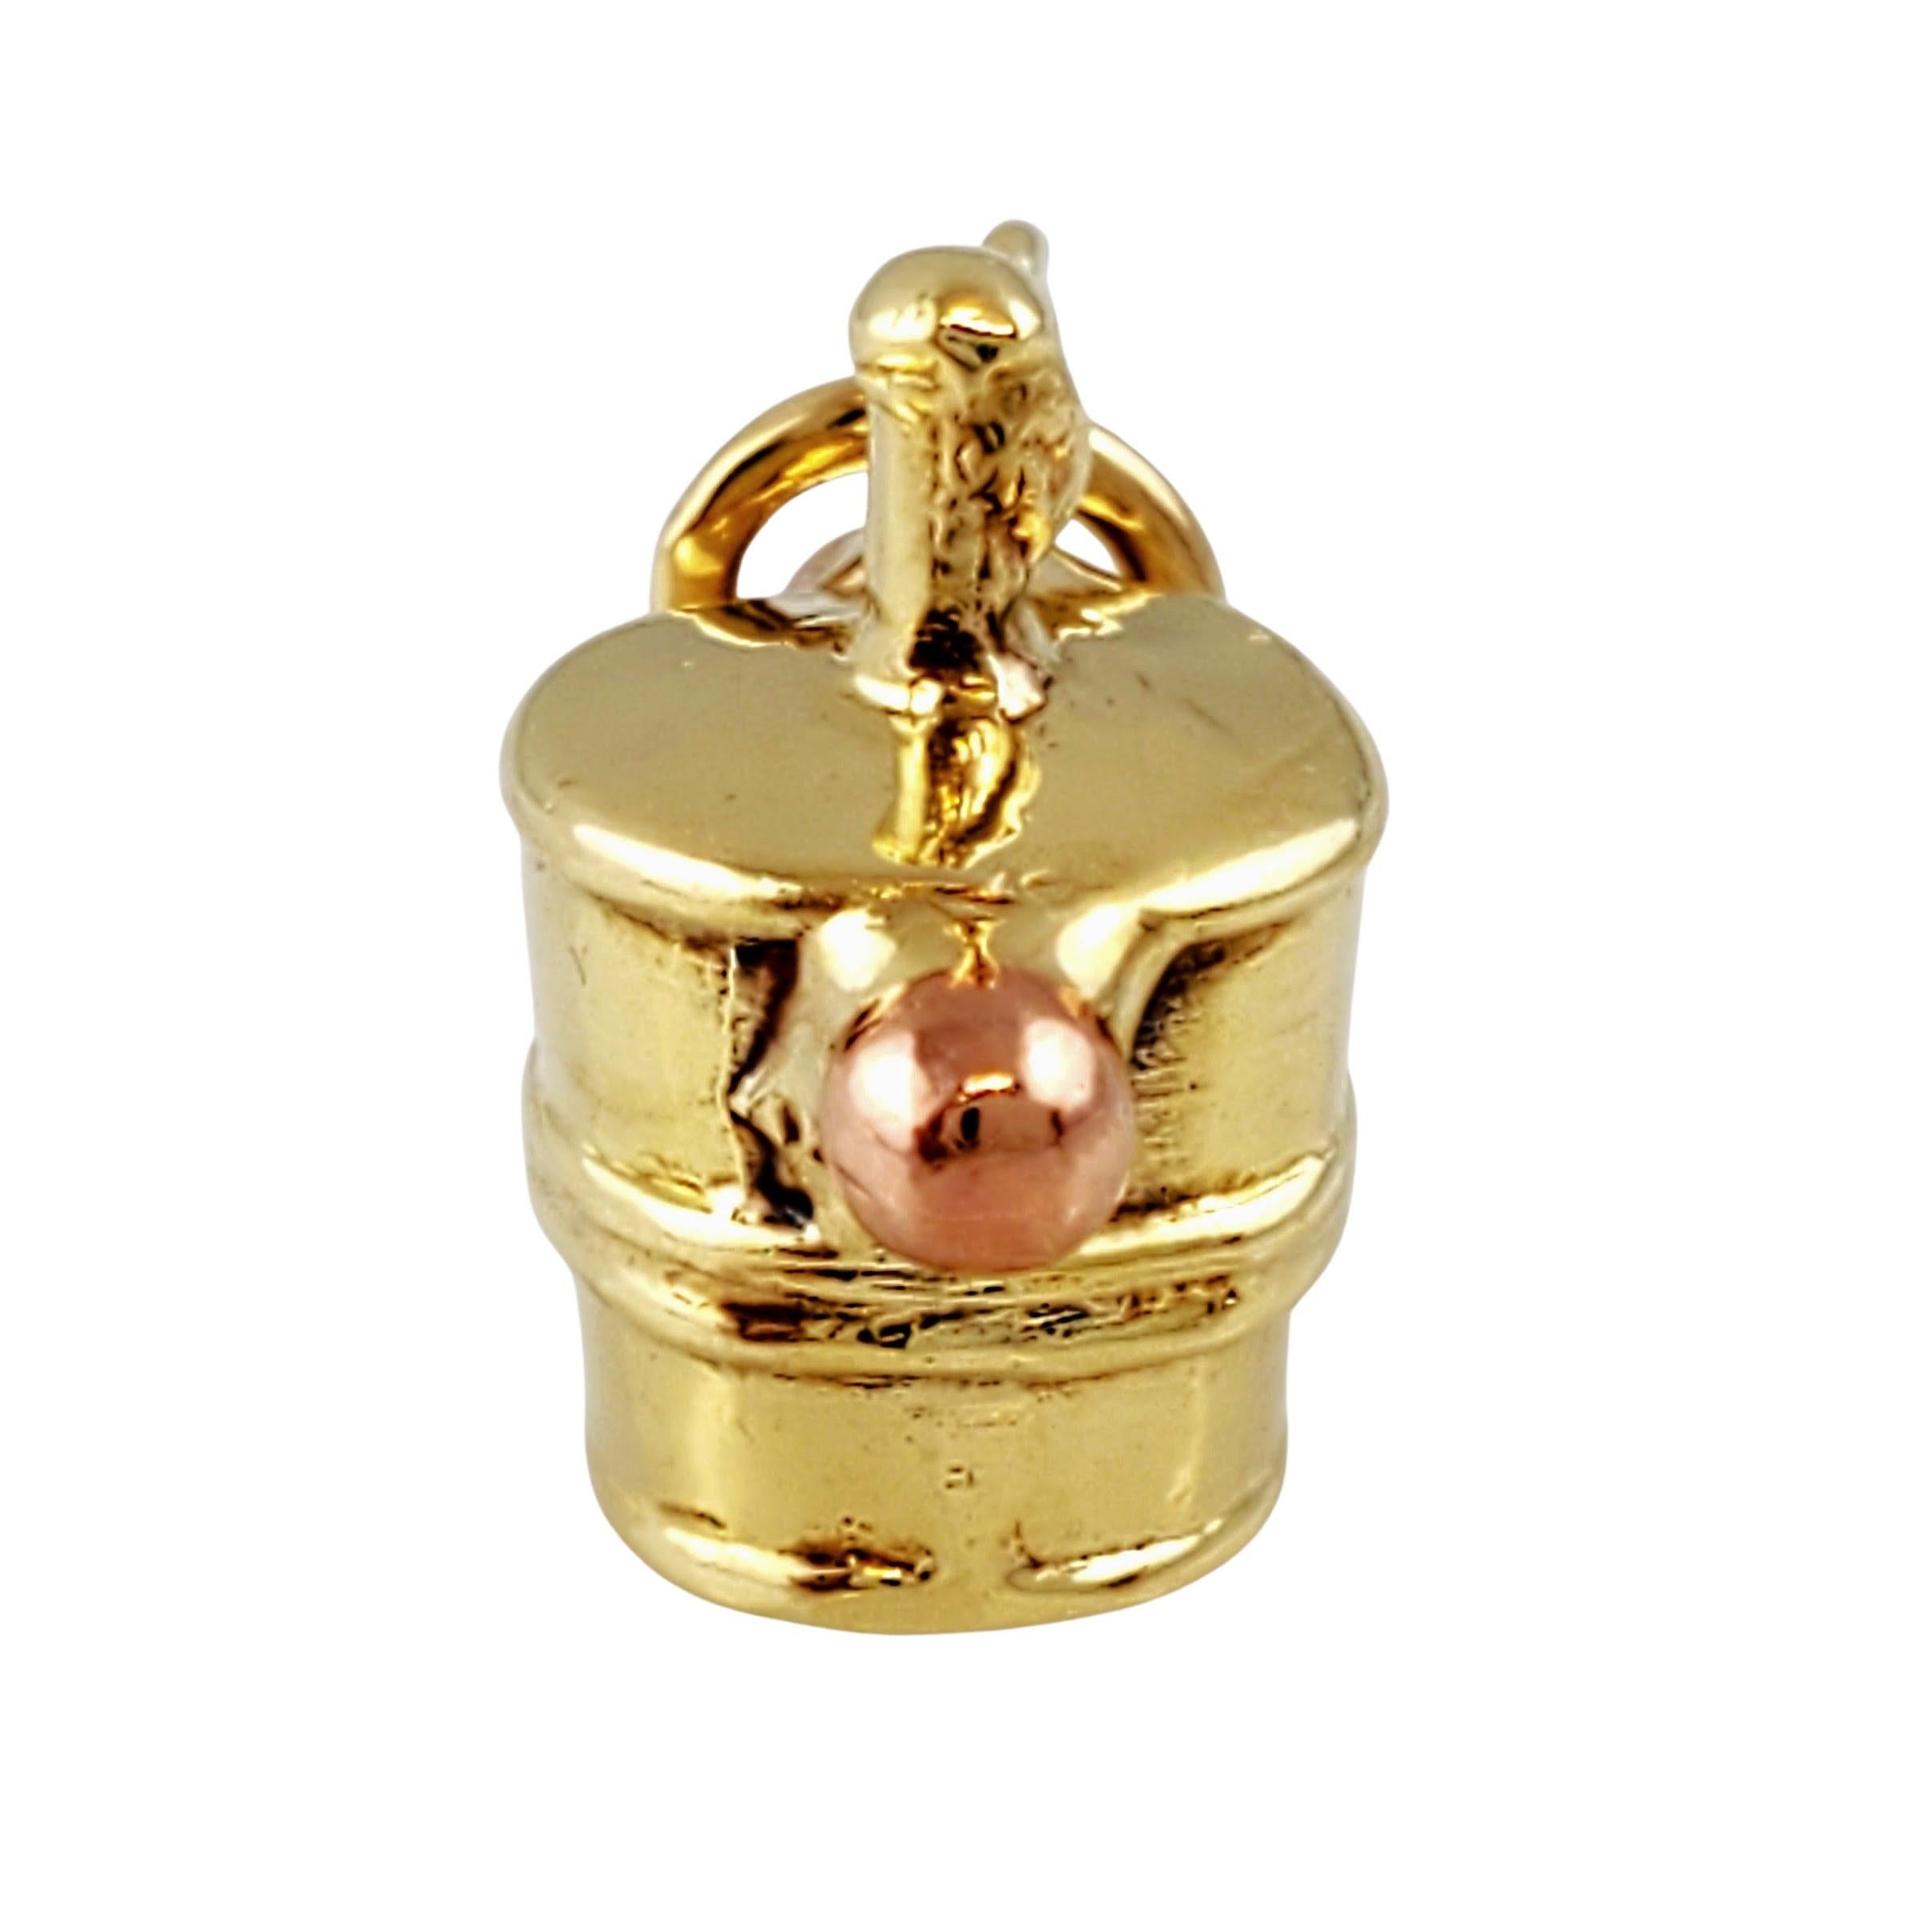 8K Yellow Gold Ice Bucket Charm

Beautiful 3D 8K yellow gold ice bucket charm with hints of rose gold.

Size: 11mm X 11mm 

Weight: 0.5 dwt / 0.9 gr

Tested 8k

Very good condition, professionally polished.

Will come packaged in a gift box and will